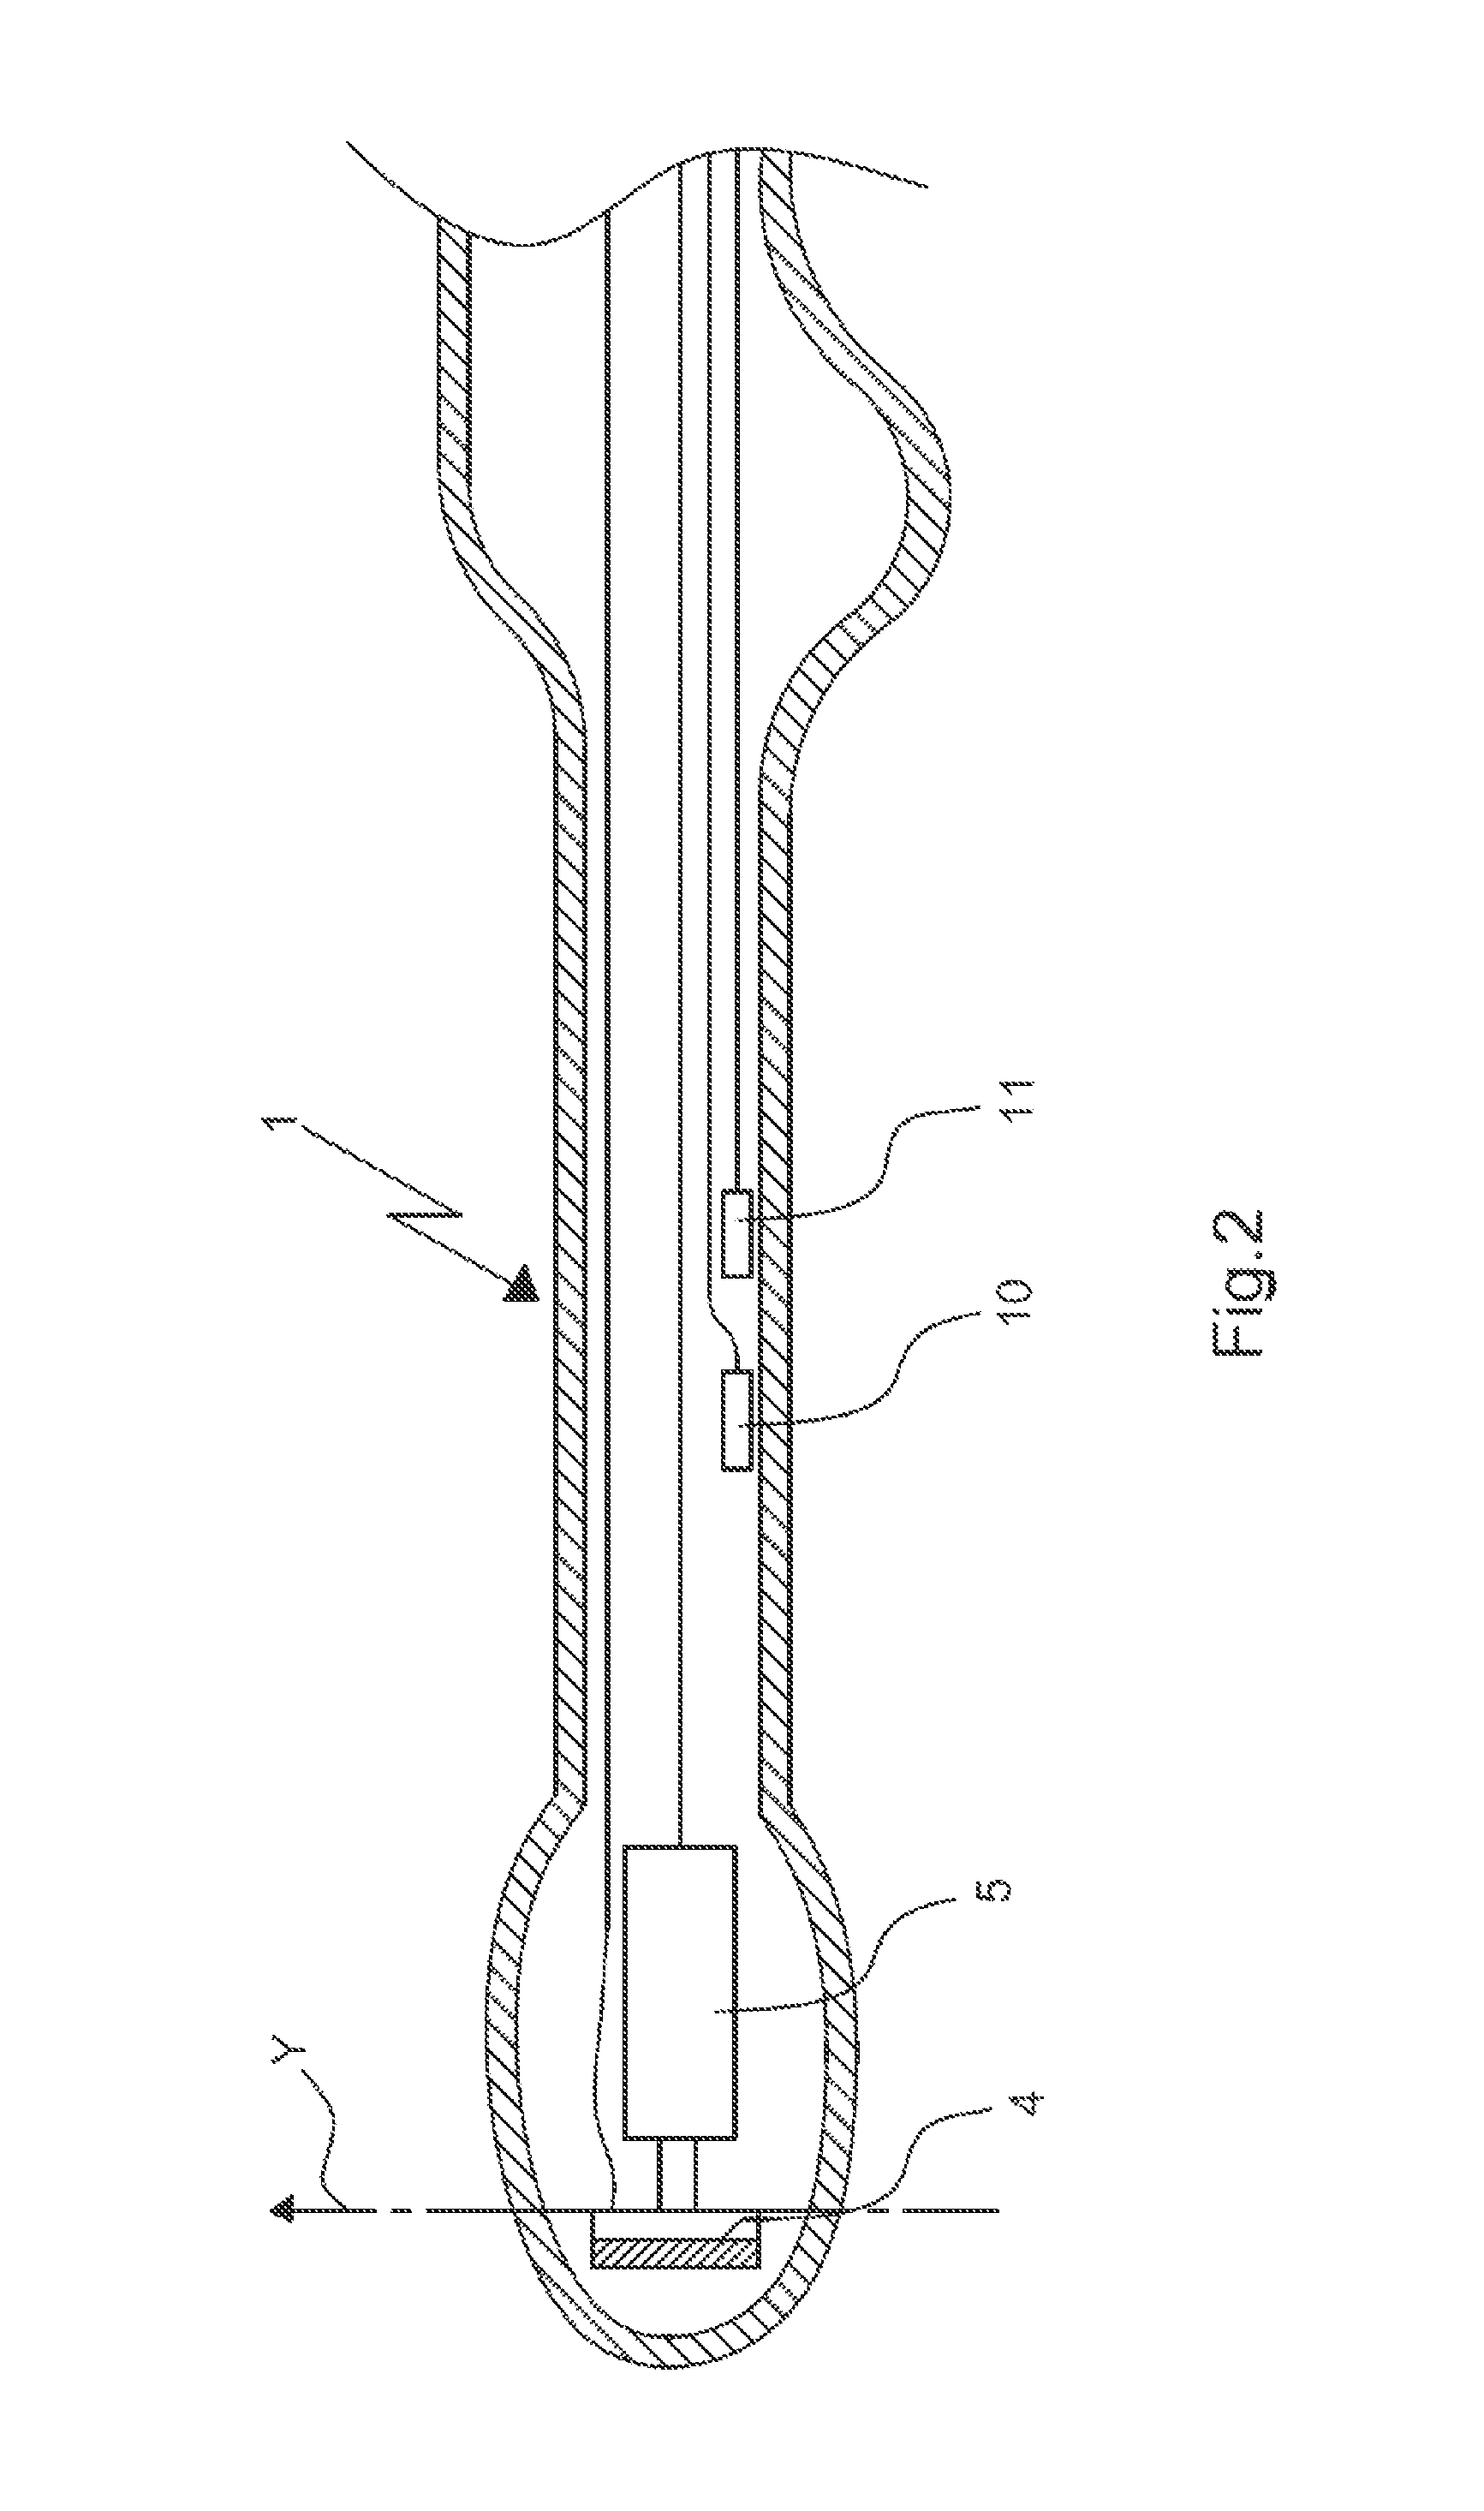 Device for guiding a medical imaging probe and method for guiding such a probe